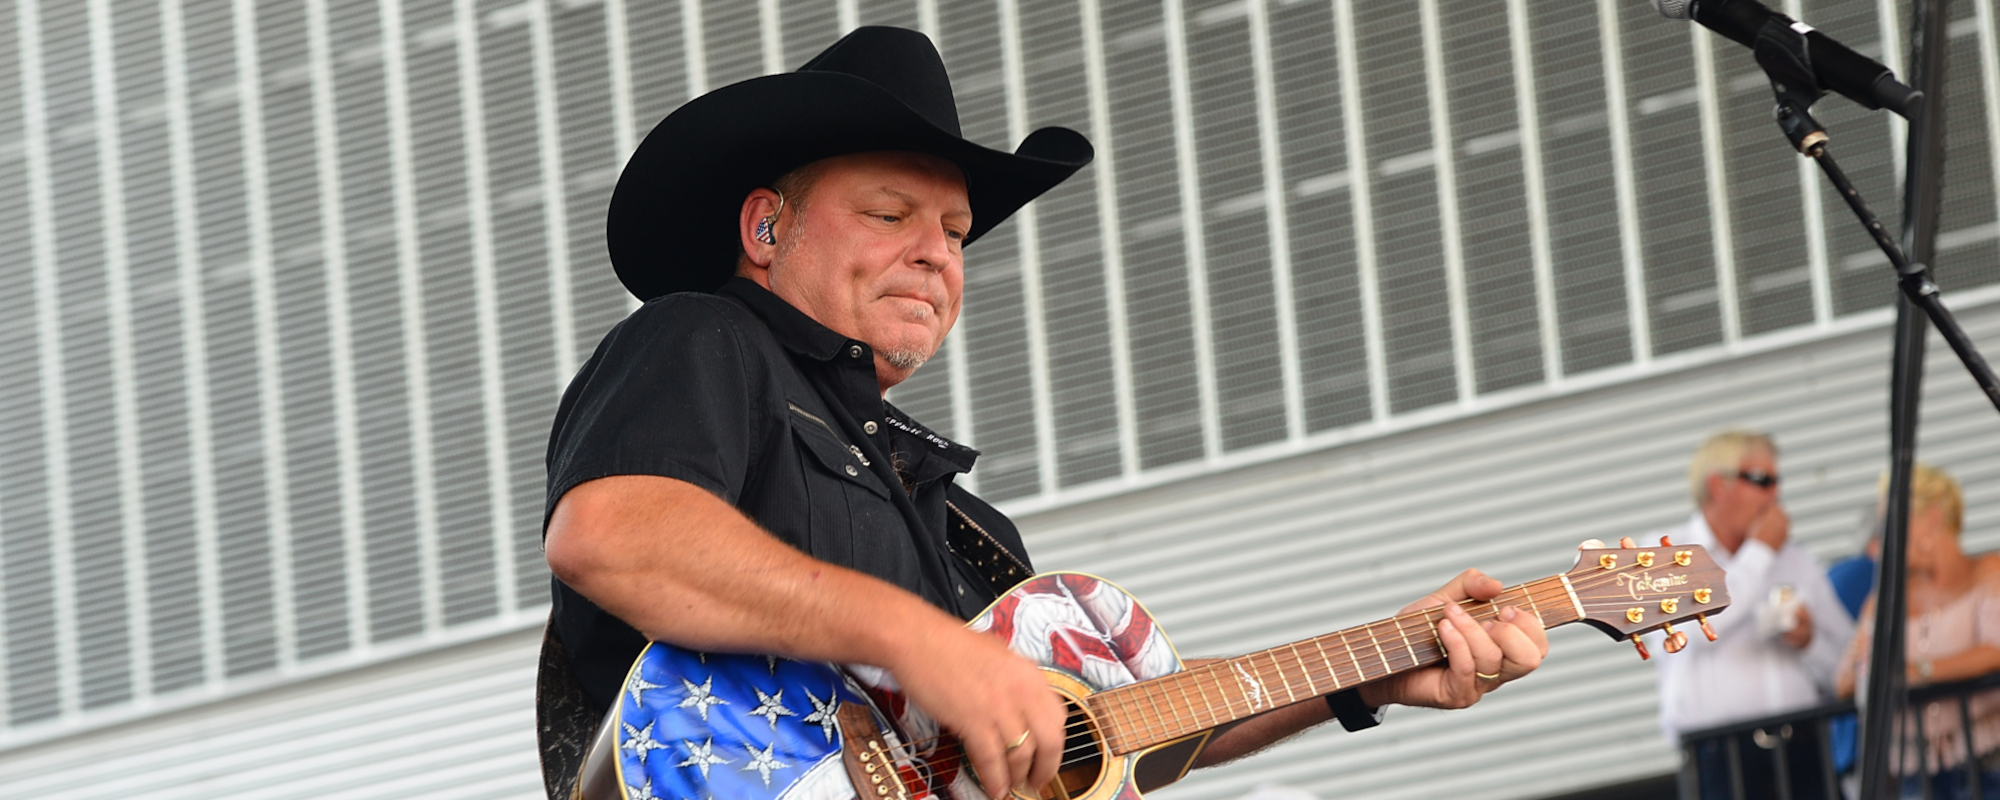 John Michael Montgomery Recovering from Tour Bus Crash—“I Am Doing Well”